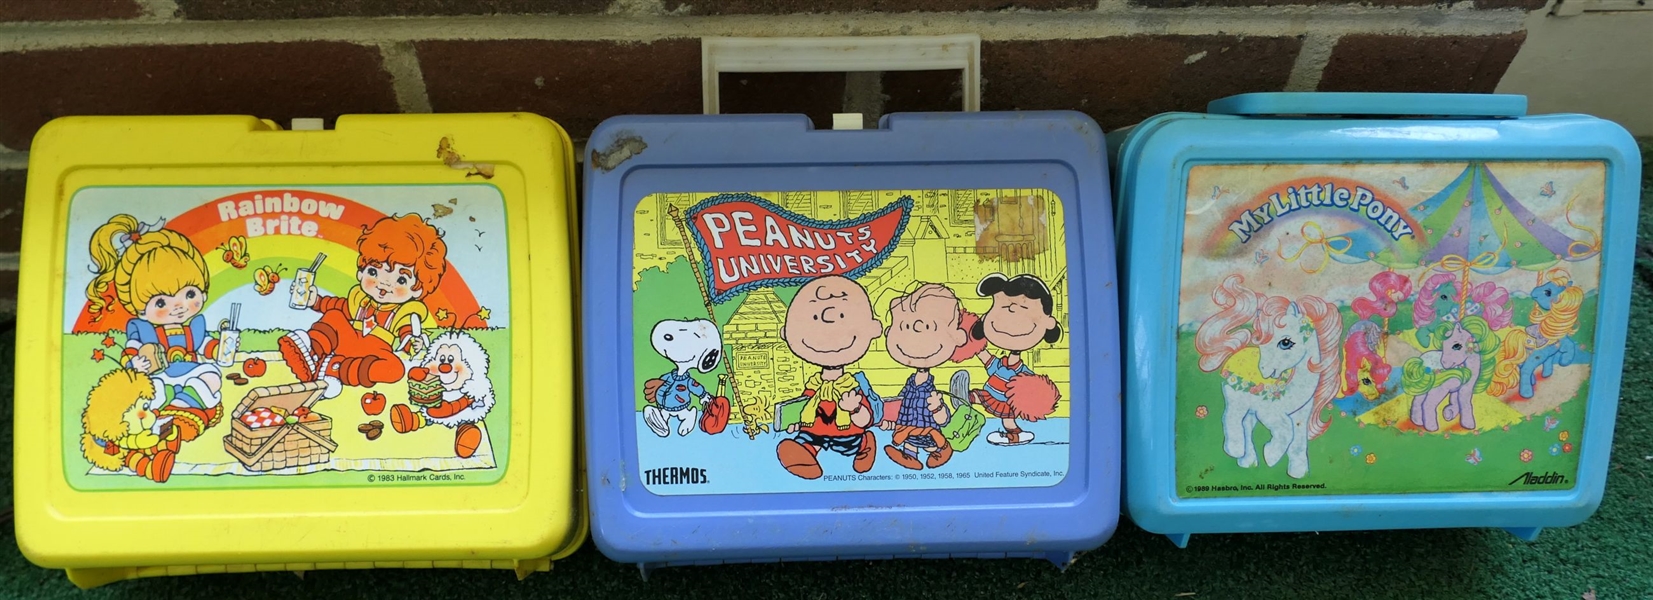 3 Vintage Plastic Lunch Boxes with Thermoses - "Rainbow Brite" "Peanuts University" and "My Little Pony"